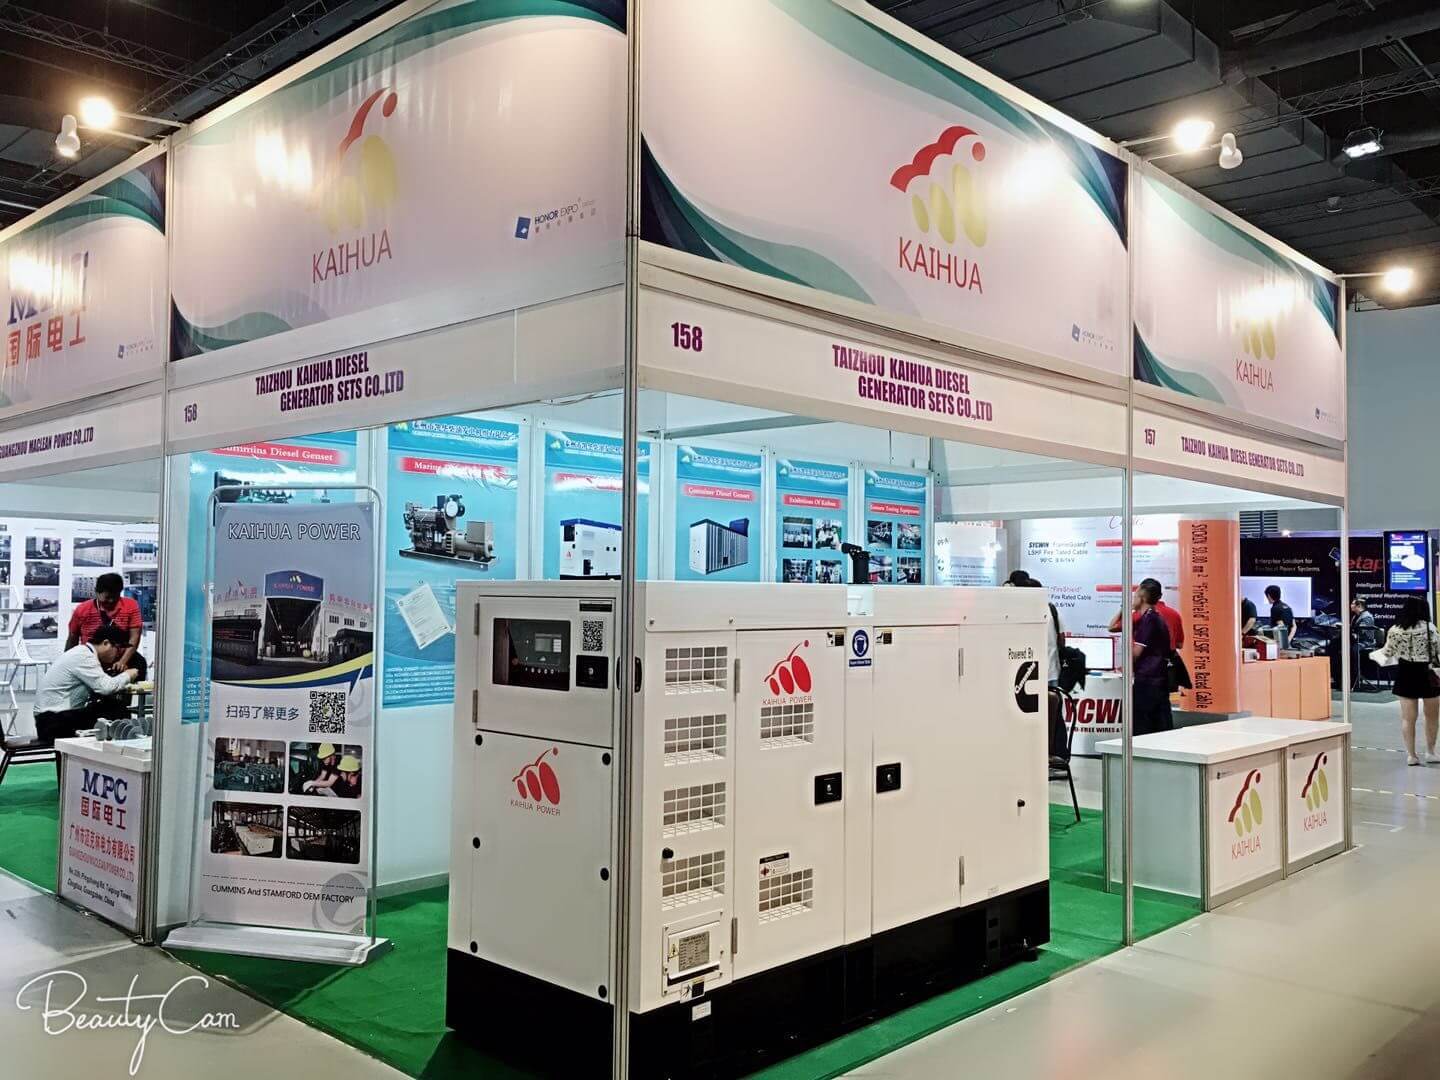 The 43rd Philippine Electricity and Energy Exhibition